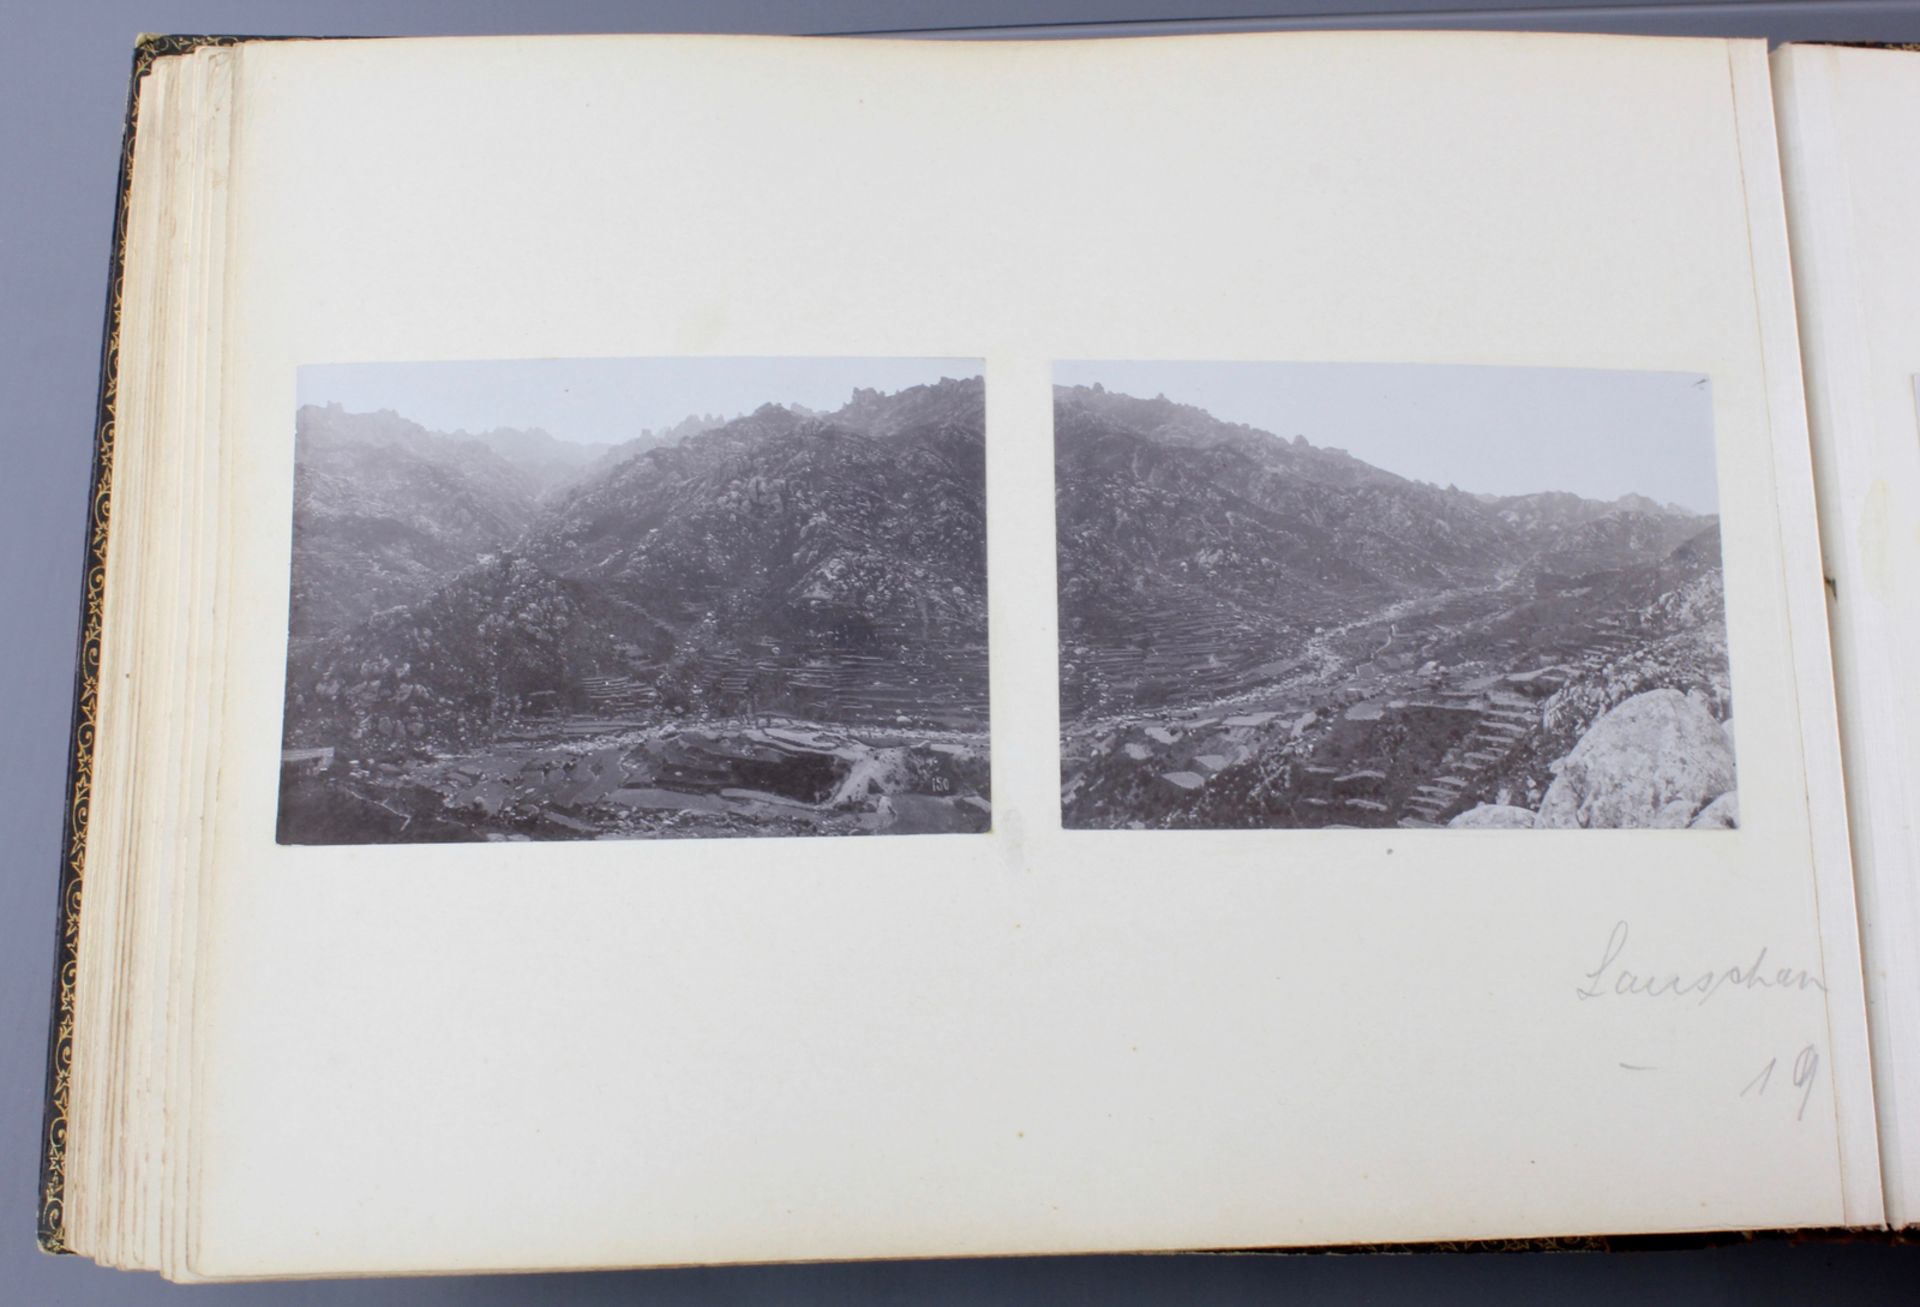 An album with photos of Chine and Japan, ca. 1900 - Image 24 of 44